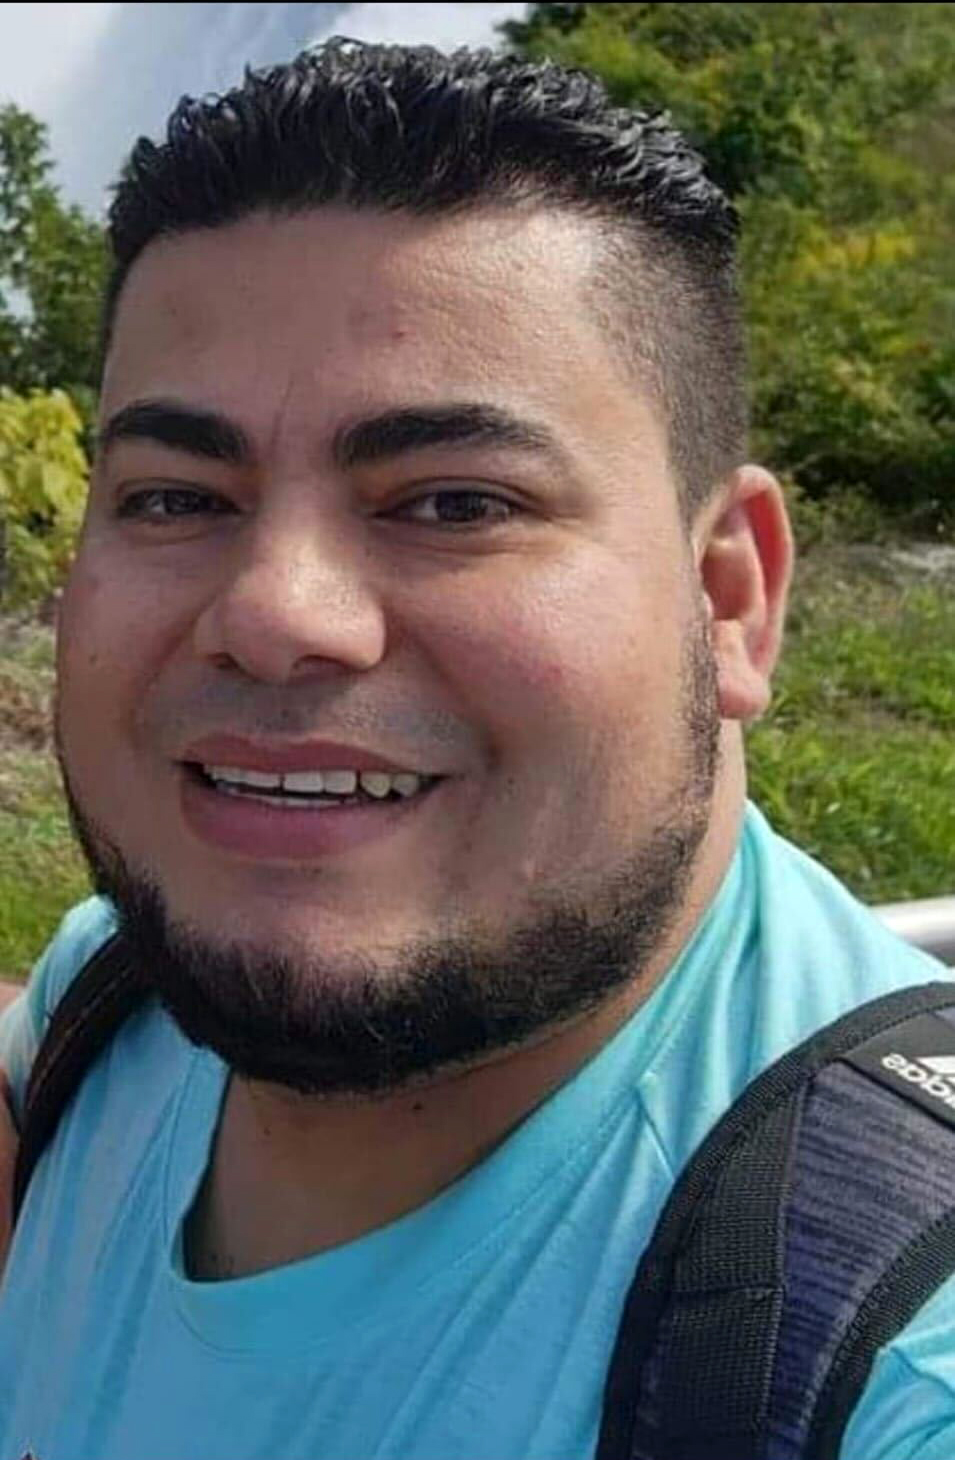 Maynor Suazo Sandoval a construction worker that died while he was working on the Francis Scott Key Bridge when it collapsed.